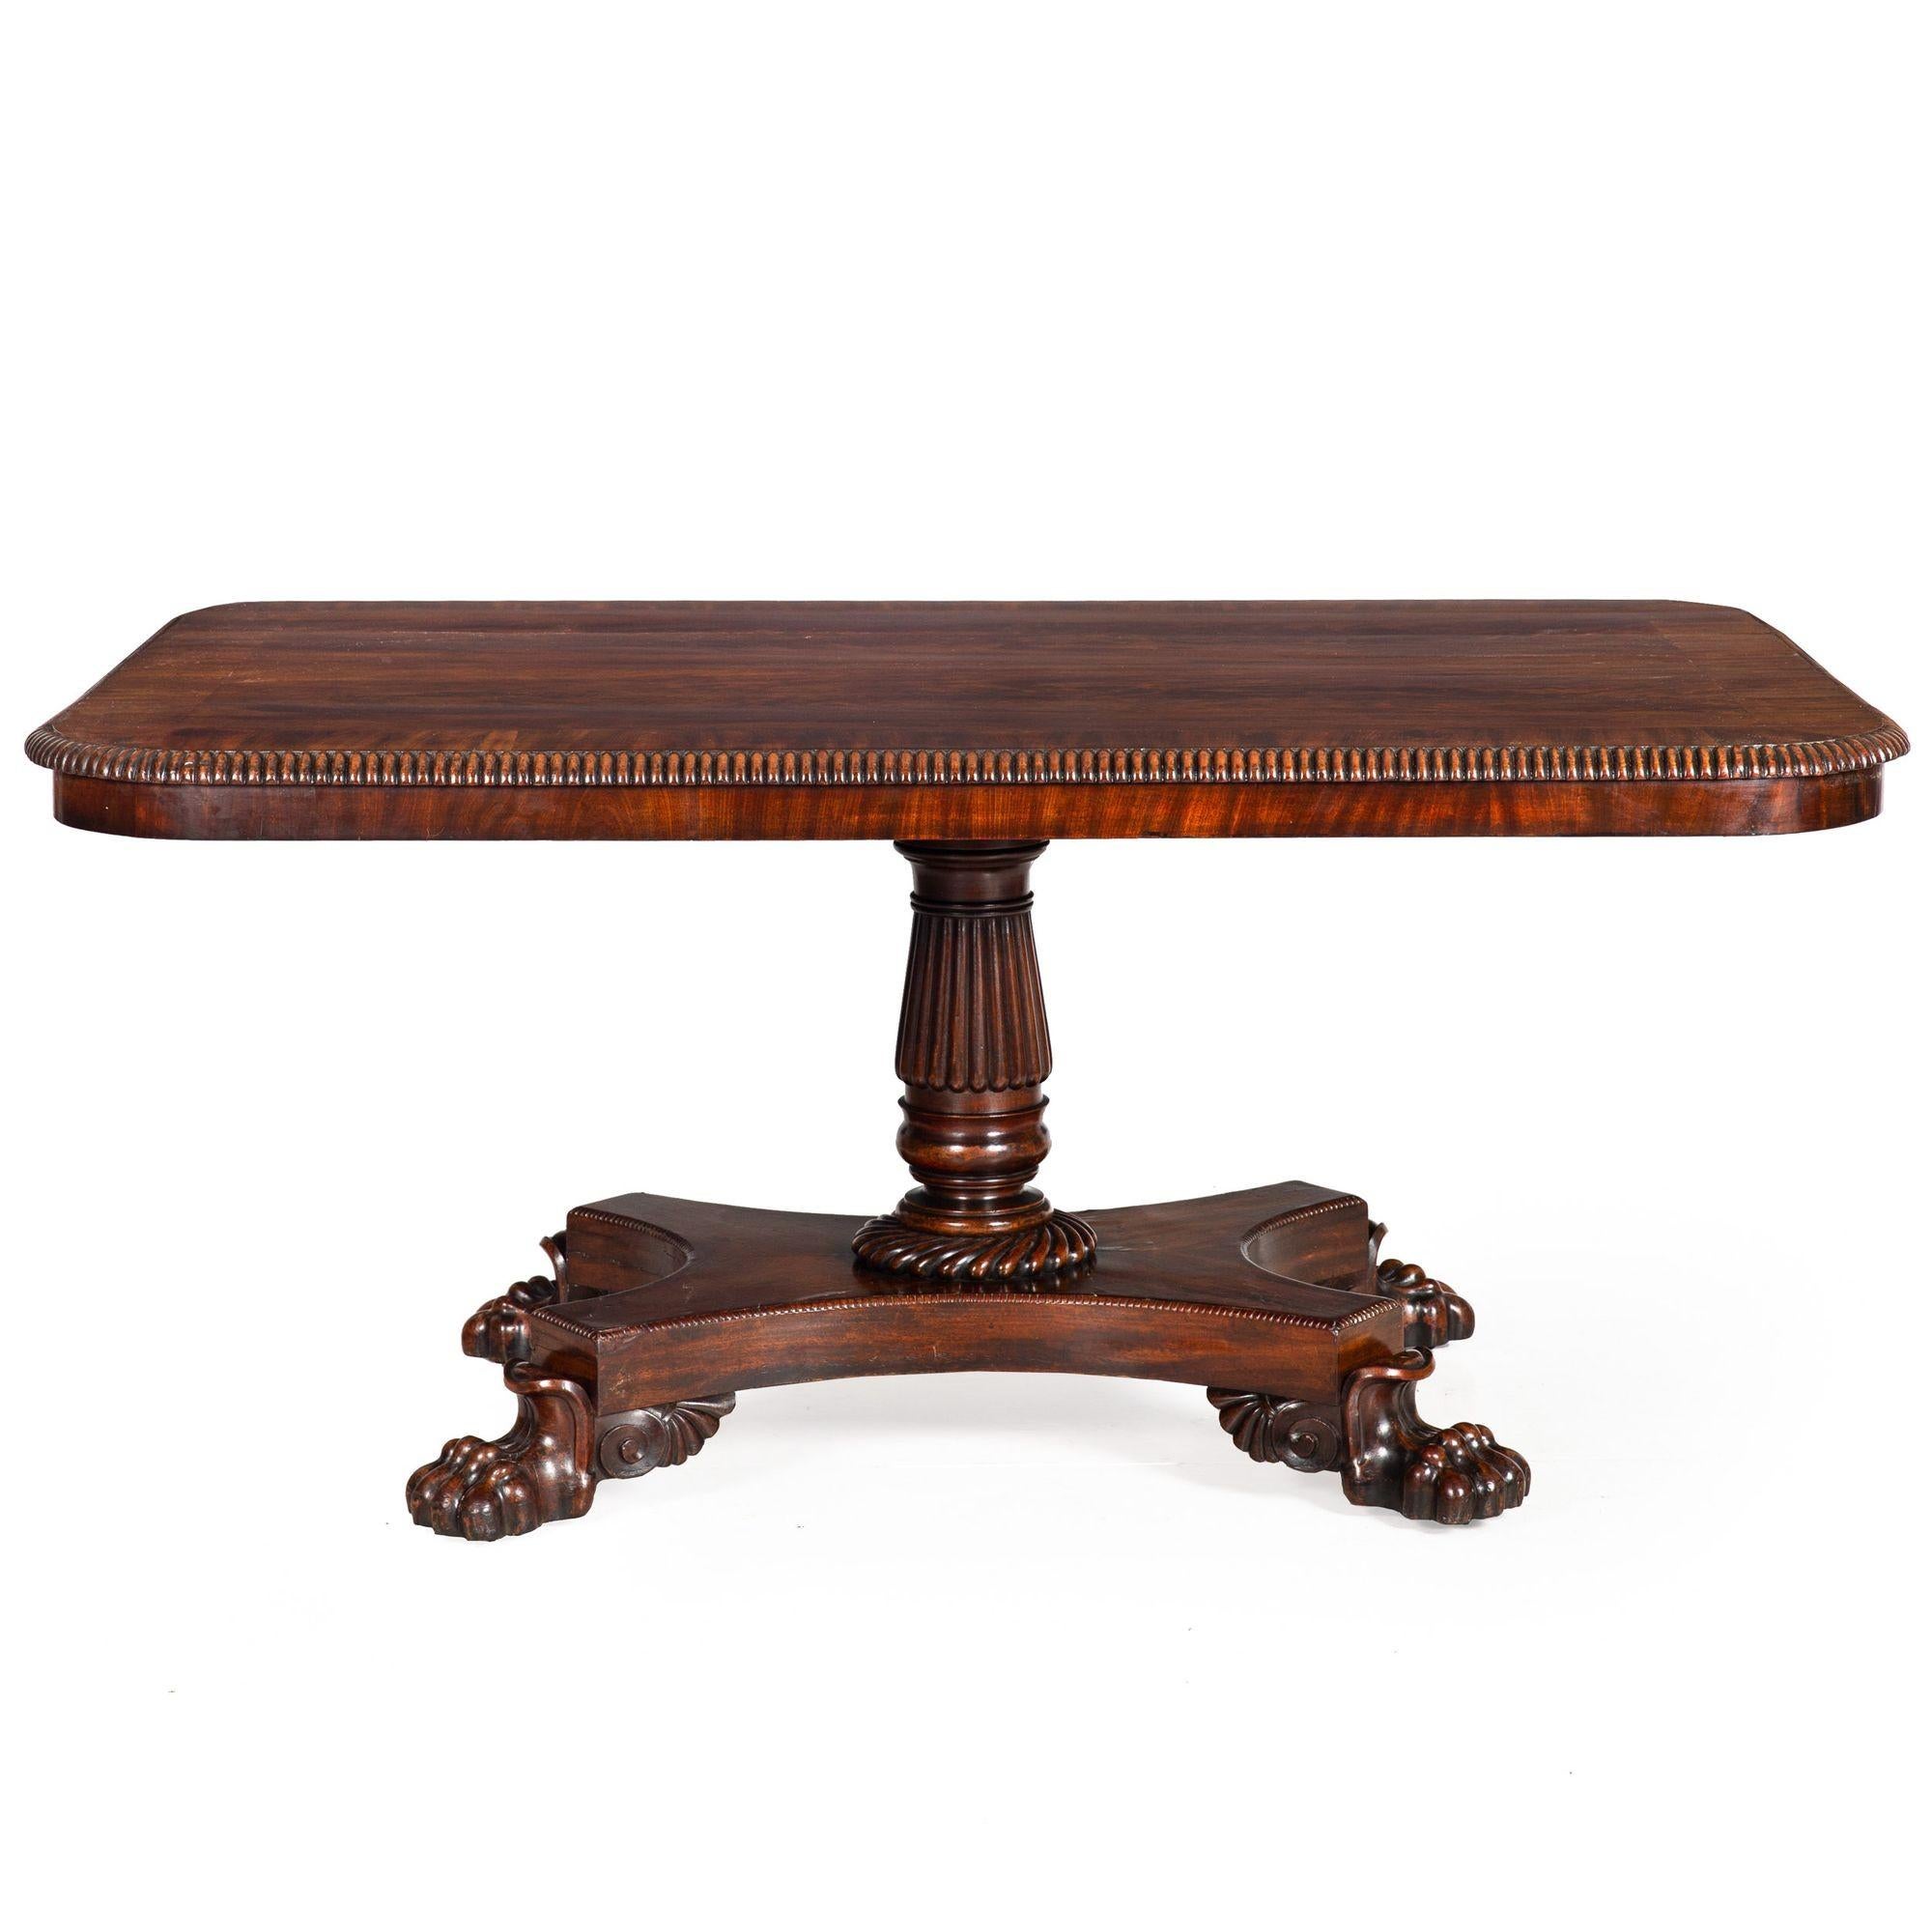 BRILLIANTLY FIGURED MAHOGANY TILT-TOP BREAKFAST TABLE ON ANIMAL PAWS
England, William IV period  circa 1840
Item # 309KMB22P

A product of the William IV era, this distinguished breakfast table exemplifies the period's penchant for robust design